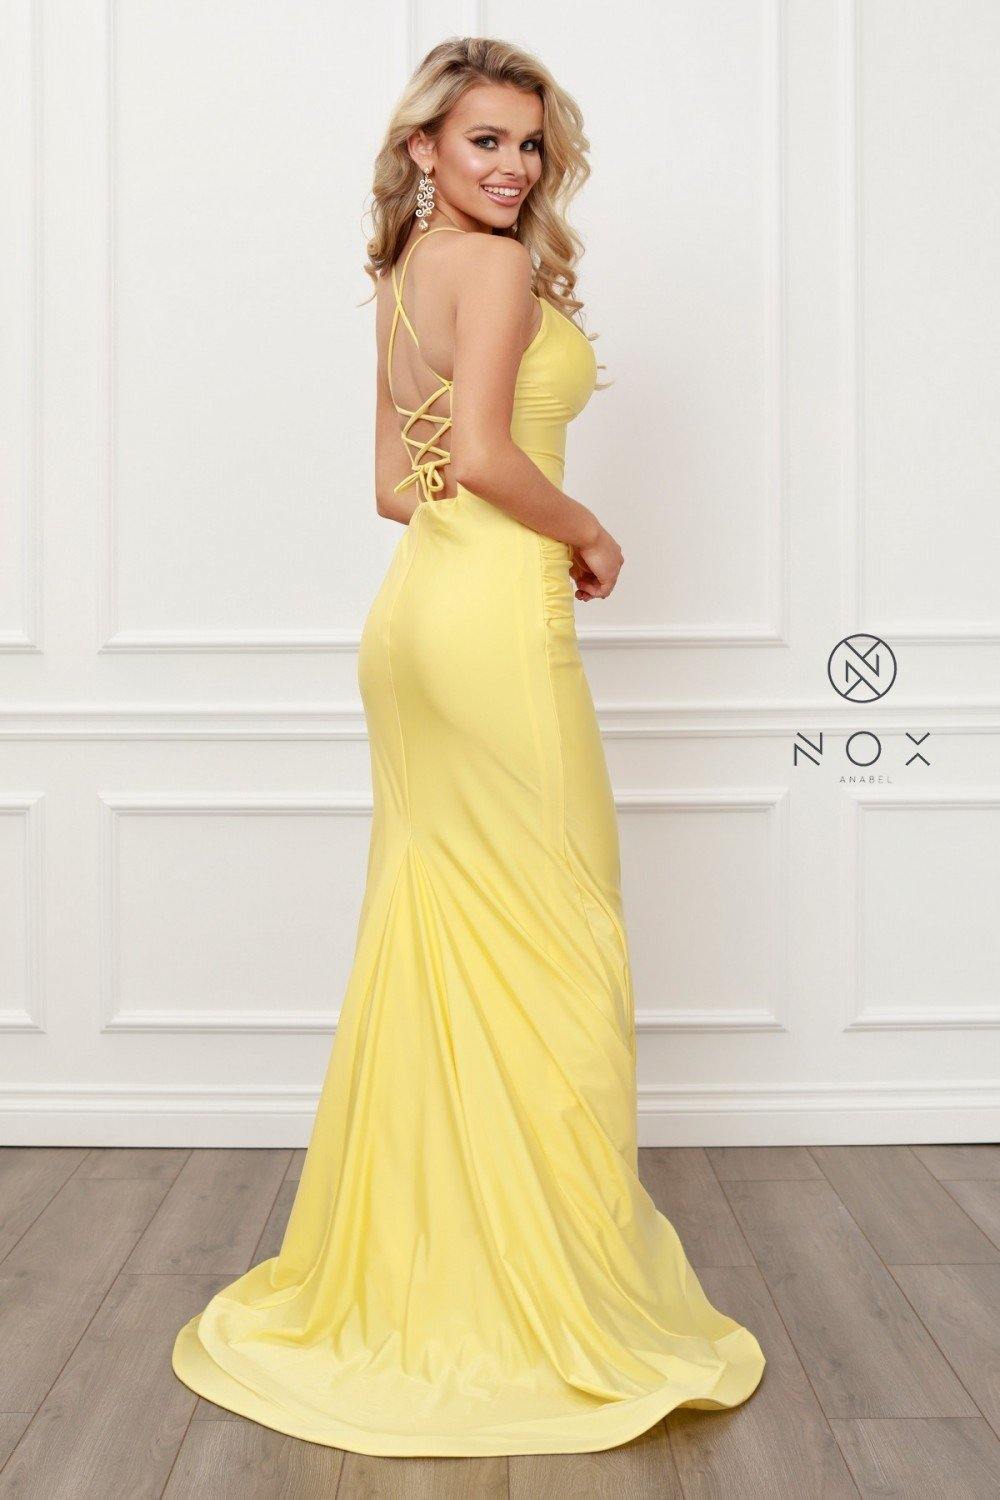 Long Fitted Prom Dress - The Dress Outlet